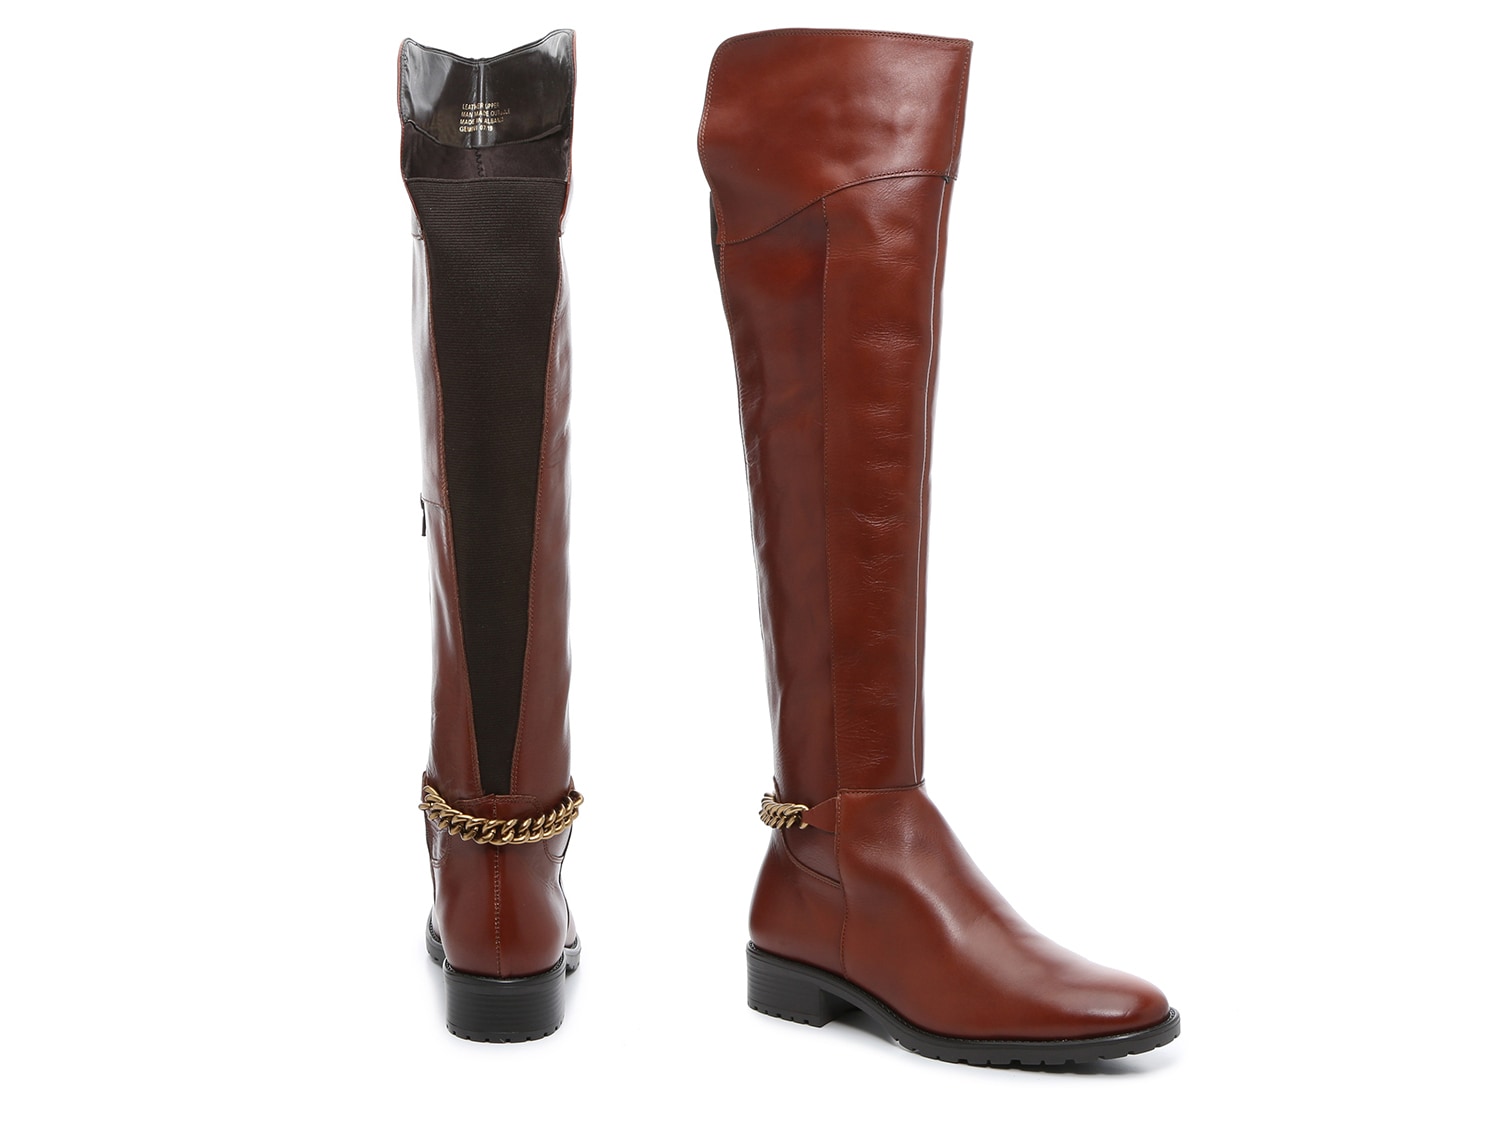 Kurt Geiger London Vito Over-the-Knee Boot - Free Shipping | DSW